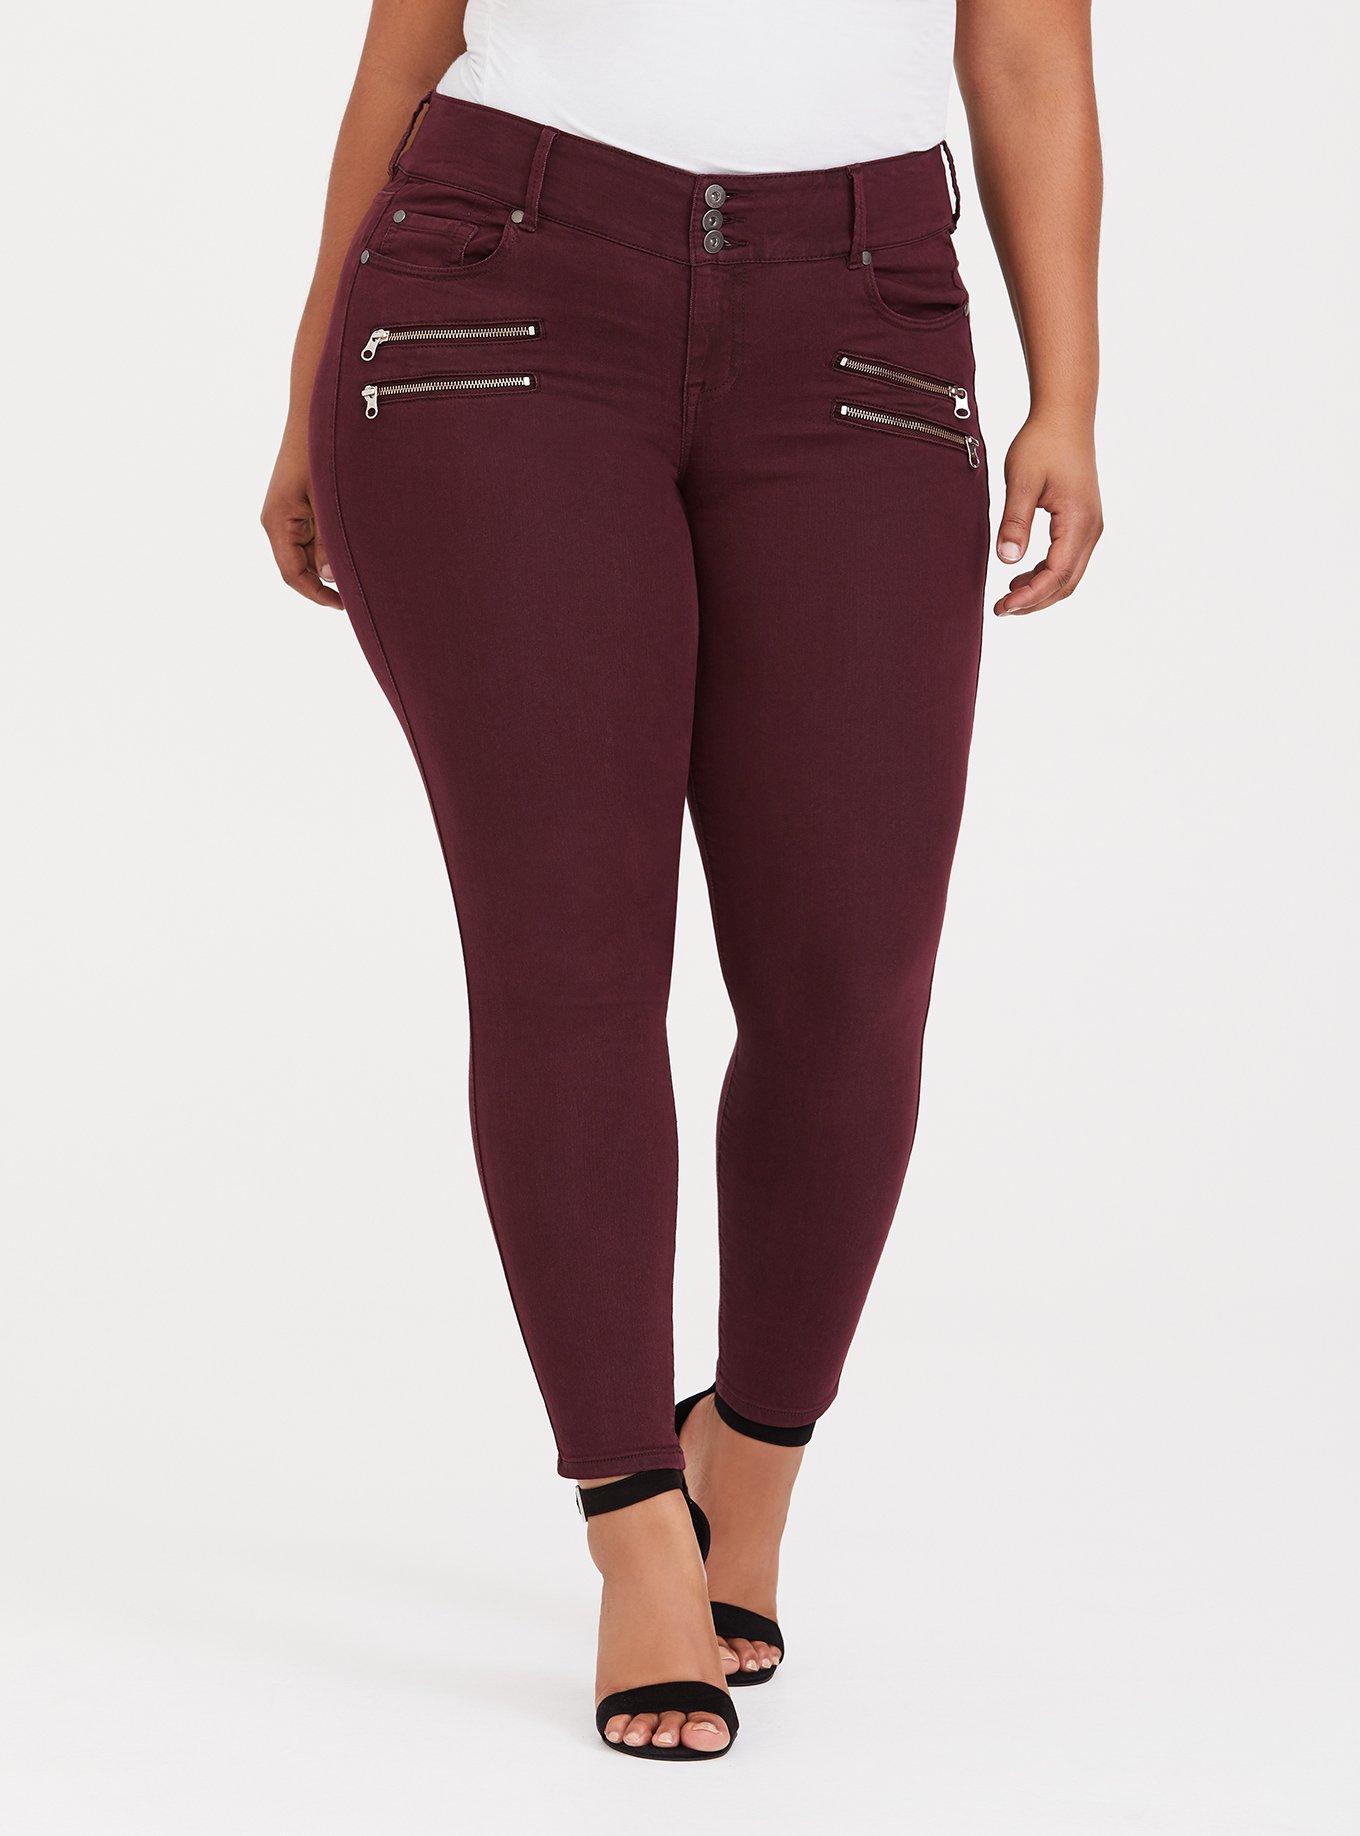 Purchase Wholesale jeggings plus size. Free Returns & Net 60 Terms on Faire